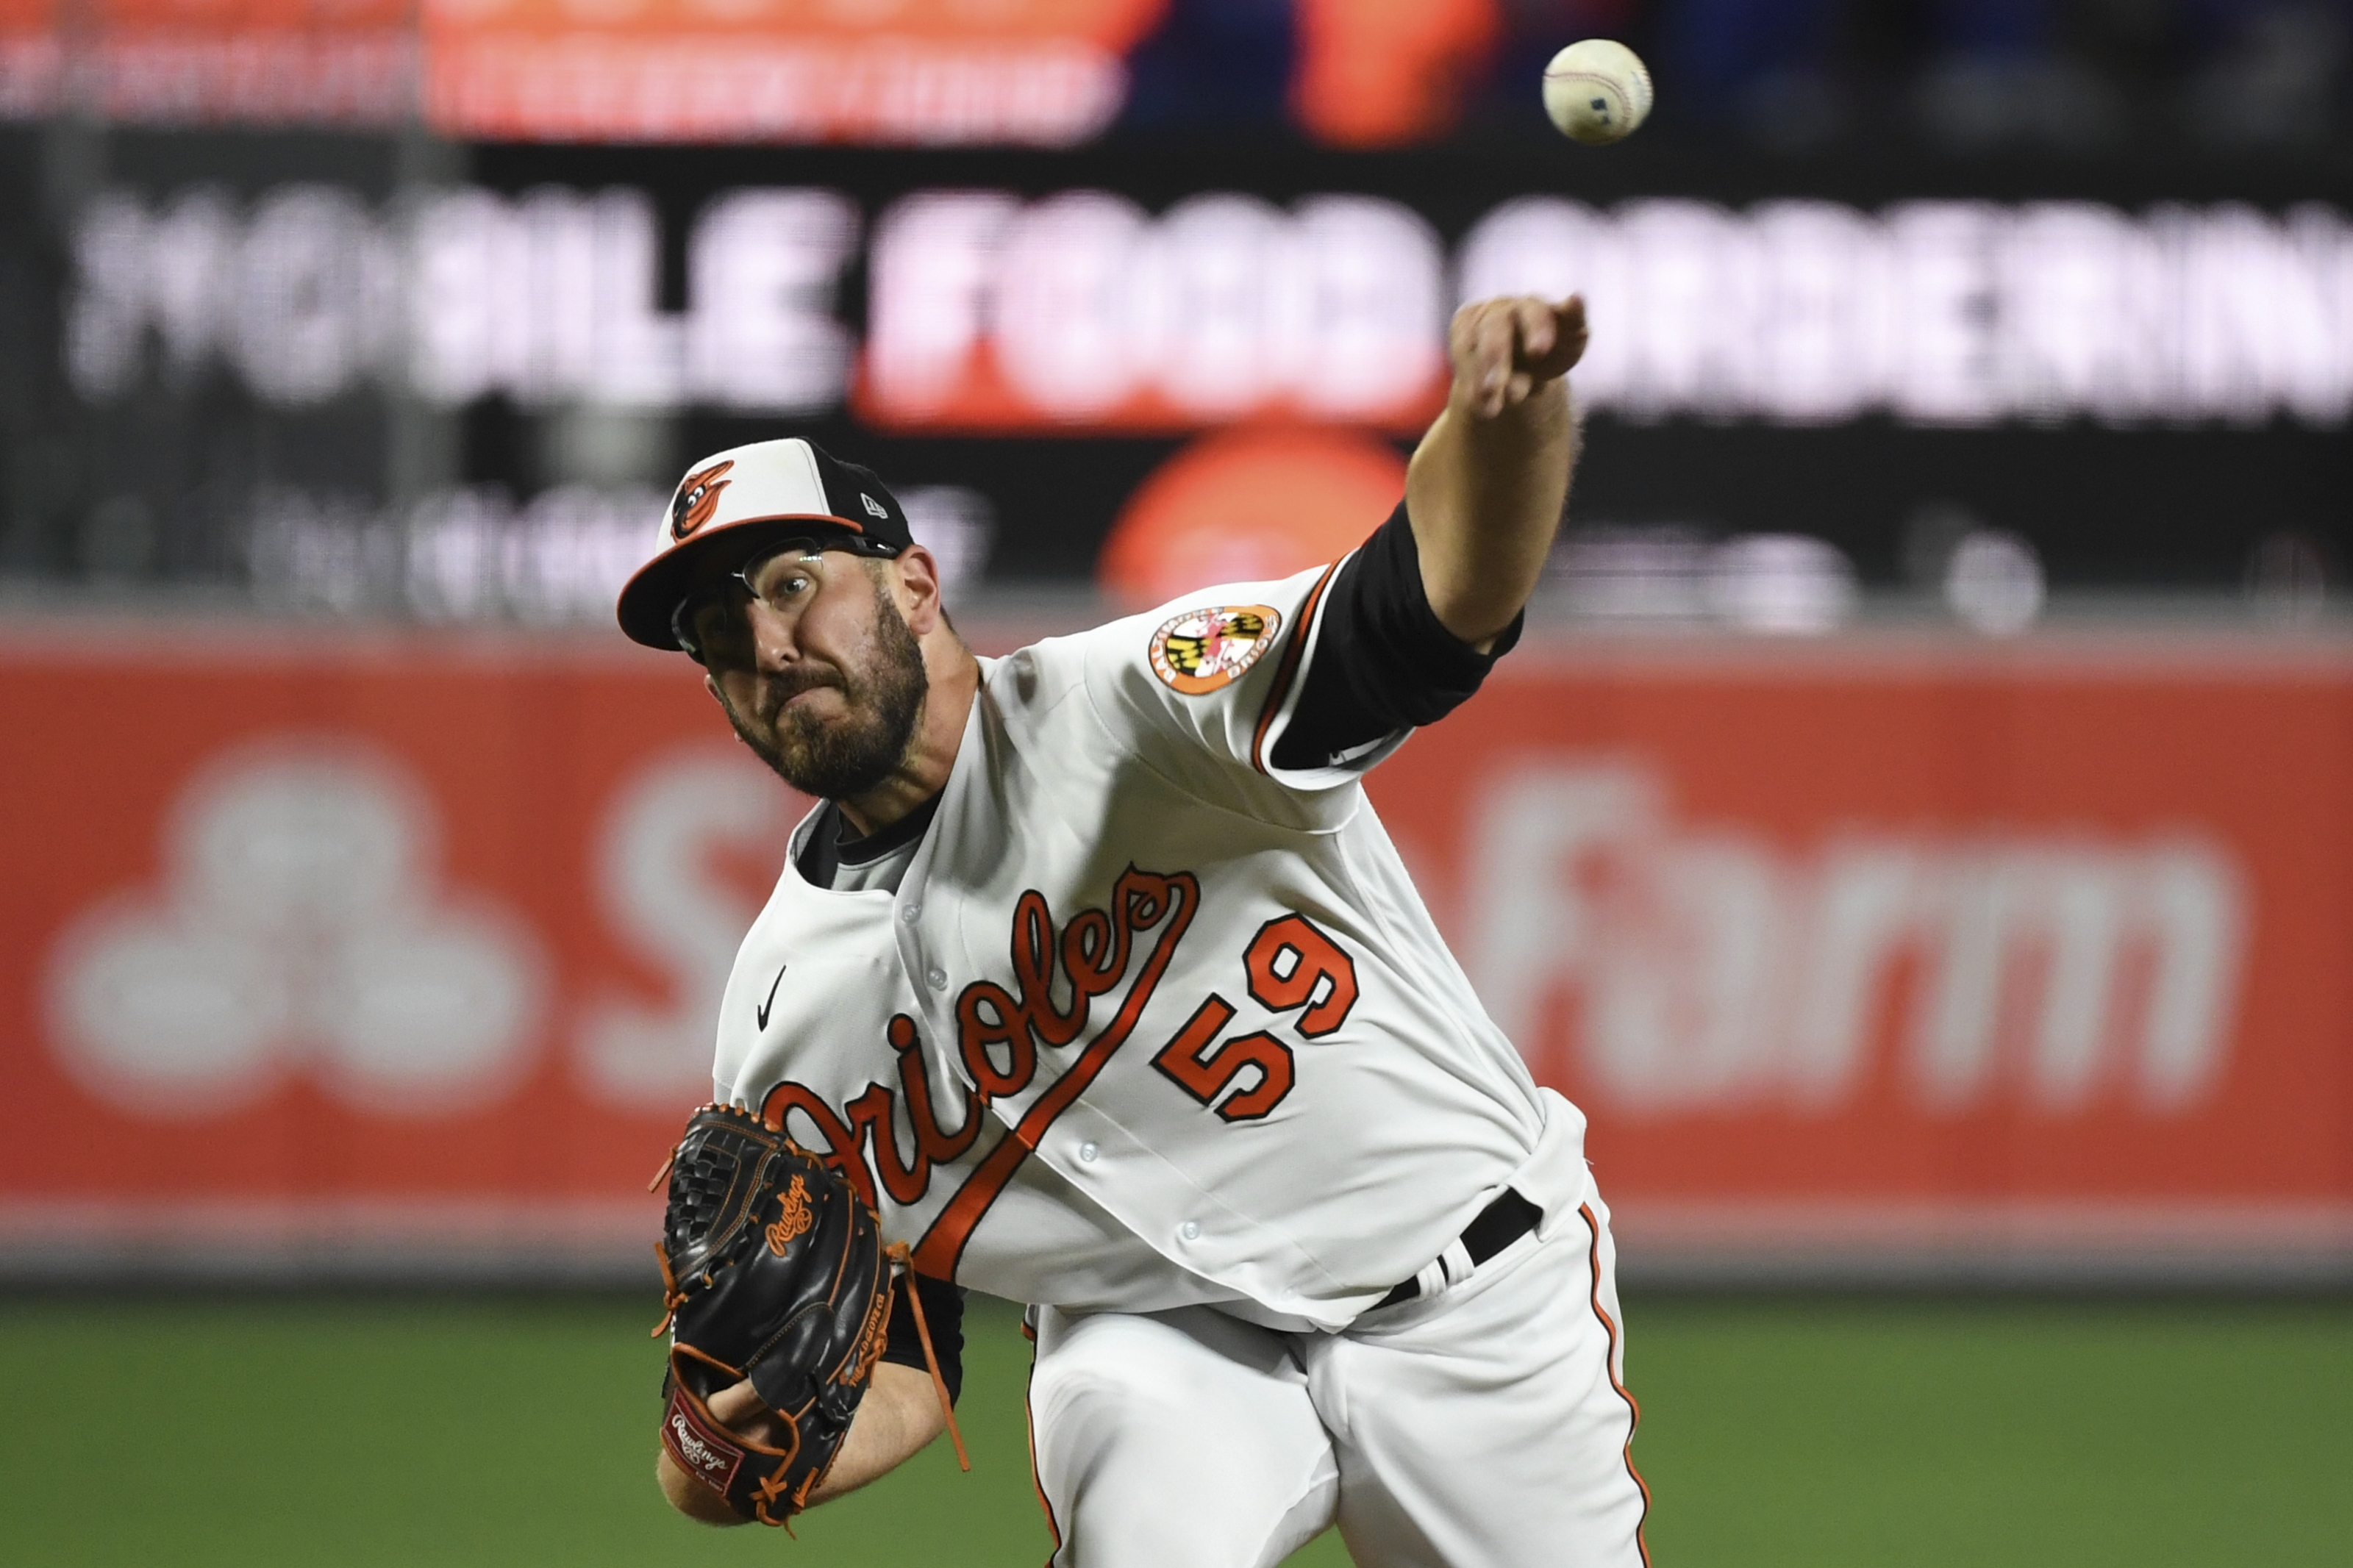 Orioles outlast Rangers ace to manufacture a gutsy team win and series  sweep in Texas, 6-3 - Camden Chat